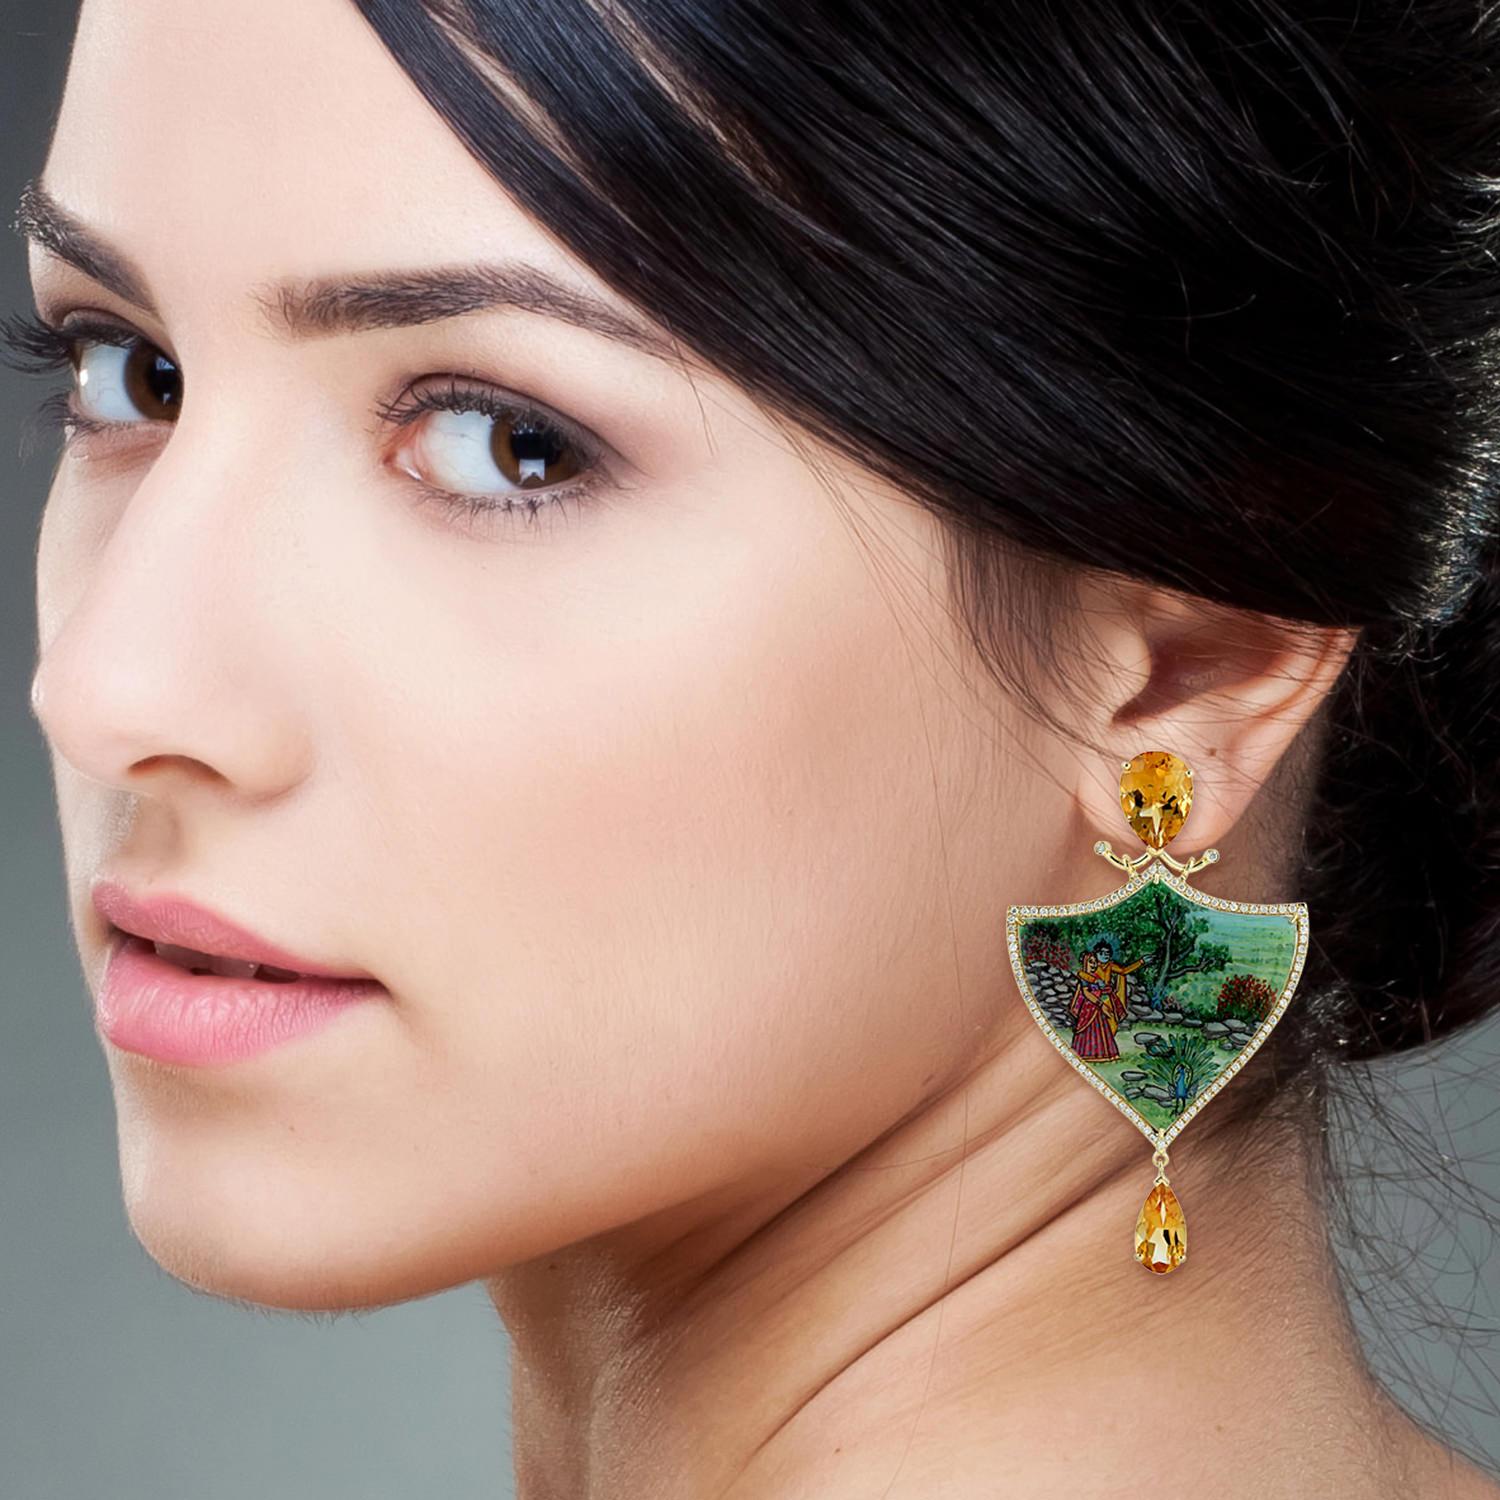 These beautiful enamel art is inspired by Royal Indian heritage during Mughal Era. These earrings feature a unique hand painted miniature art set with 18K gold.  It is set in 13.9 carats citrine, 36.85 carats Mother of Pearl and 1.26 carats of